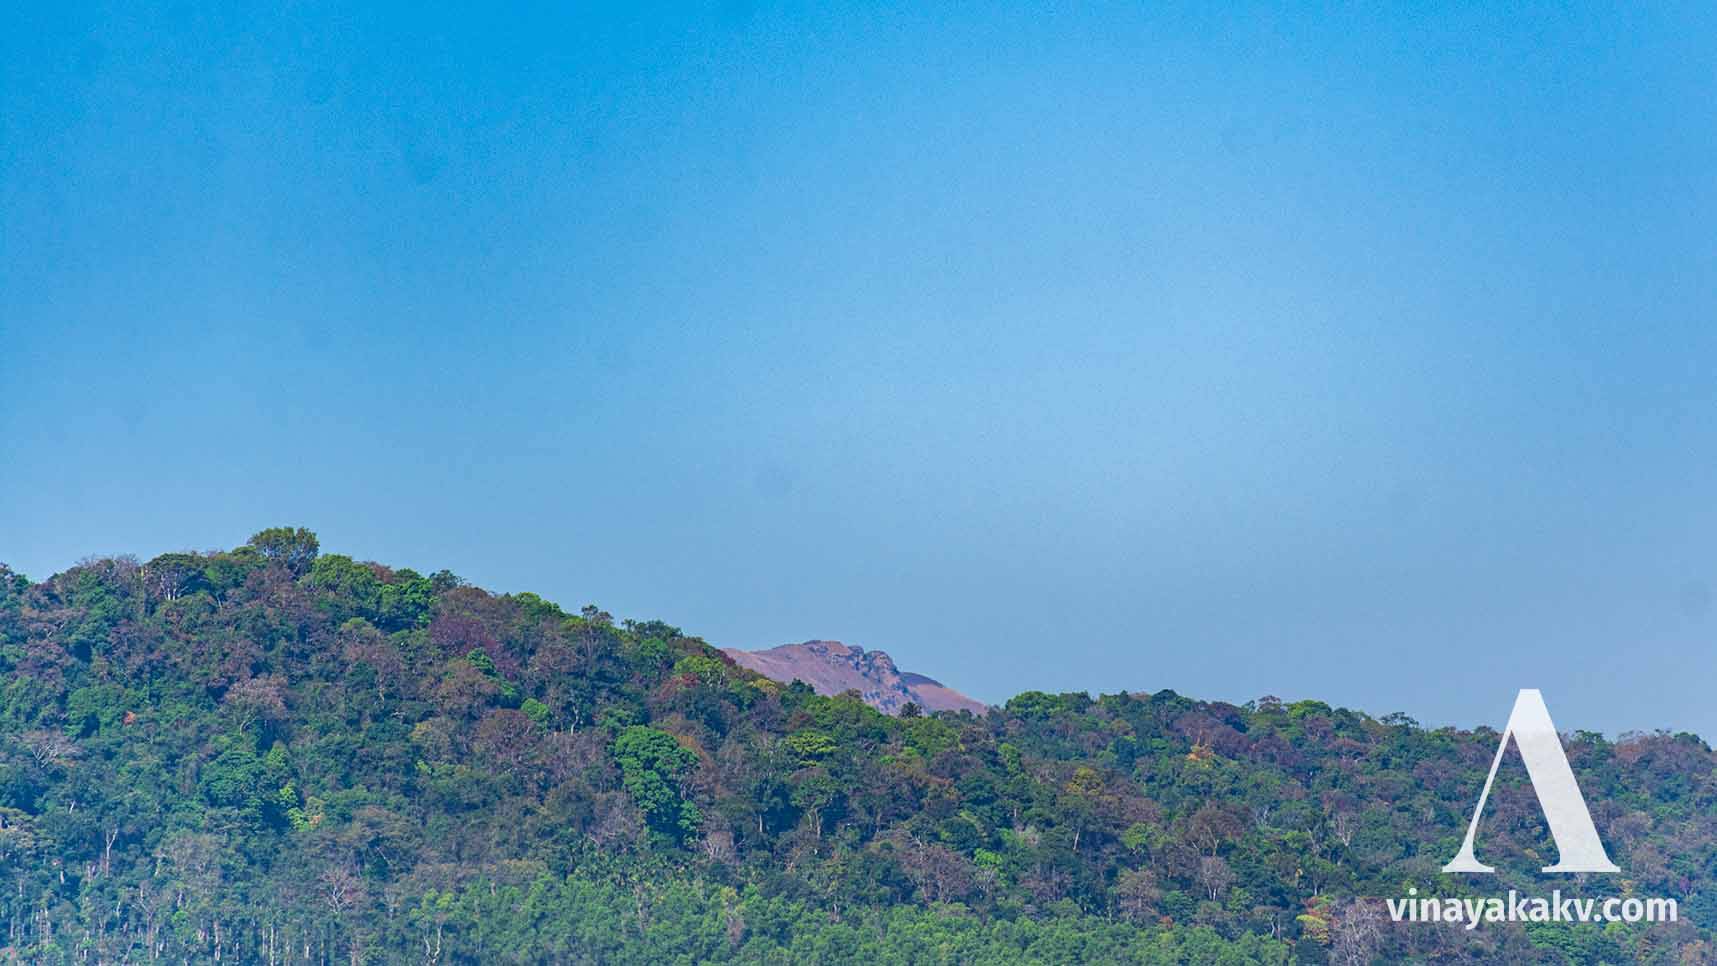 A hill at my native covered with the evergreen forest at the top, with Coffee and Areca nut plantation at the bottom. Behind, a rocky shola mountain with some of the grass burnt.